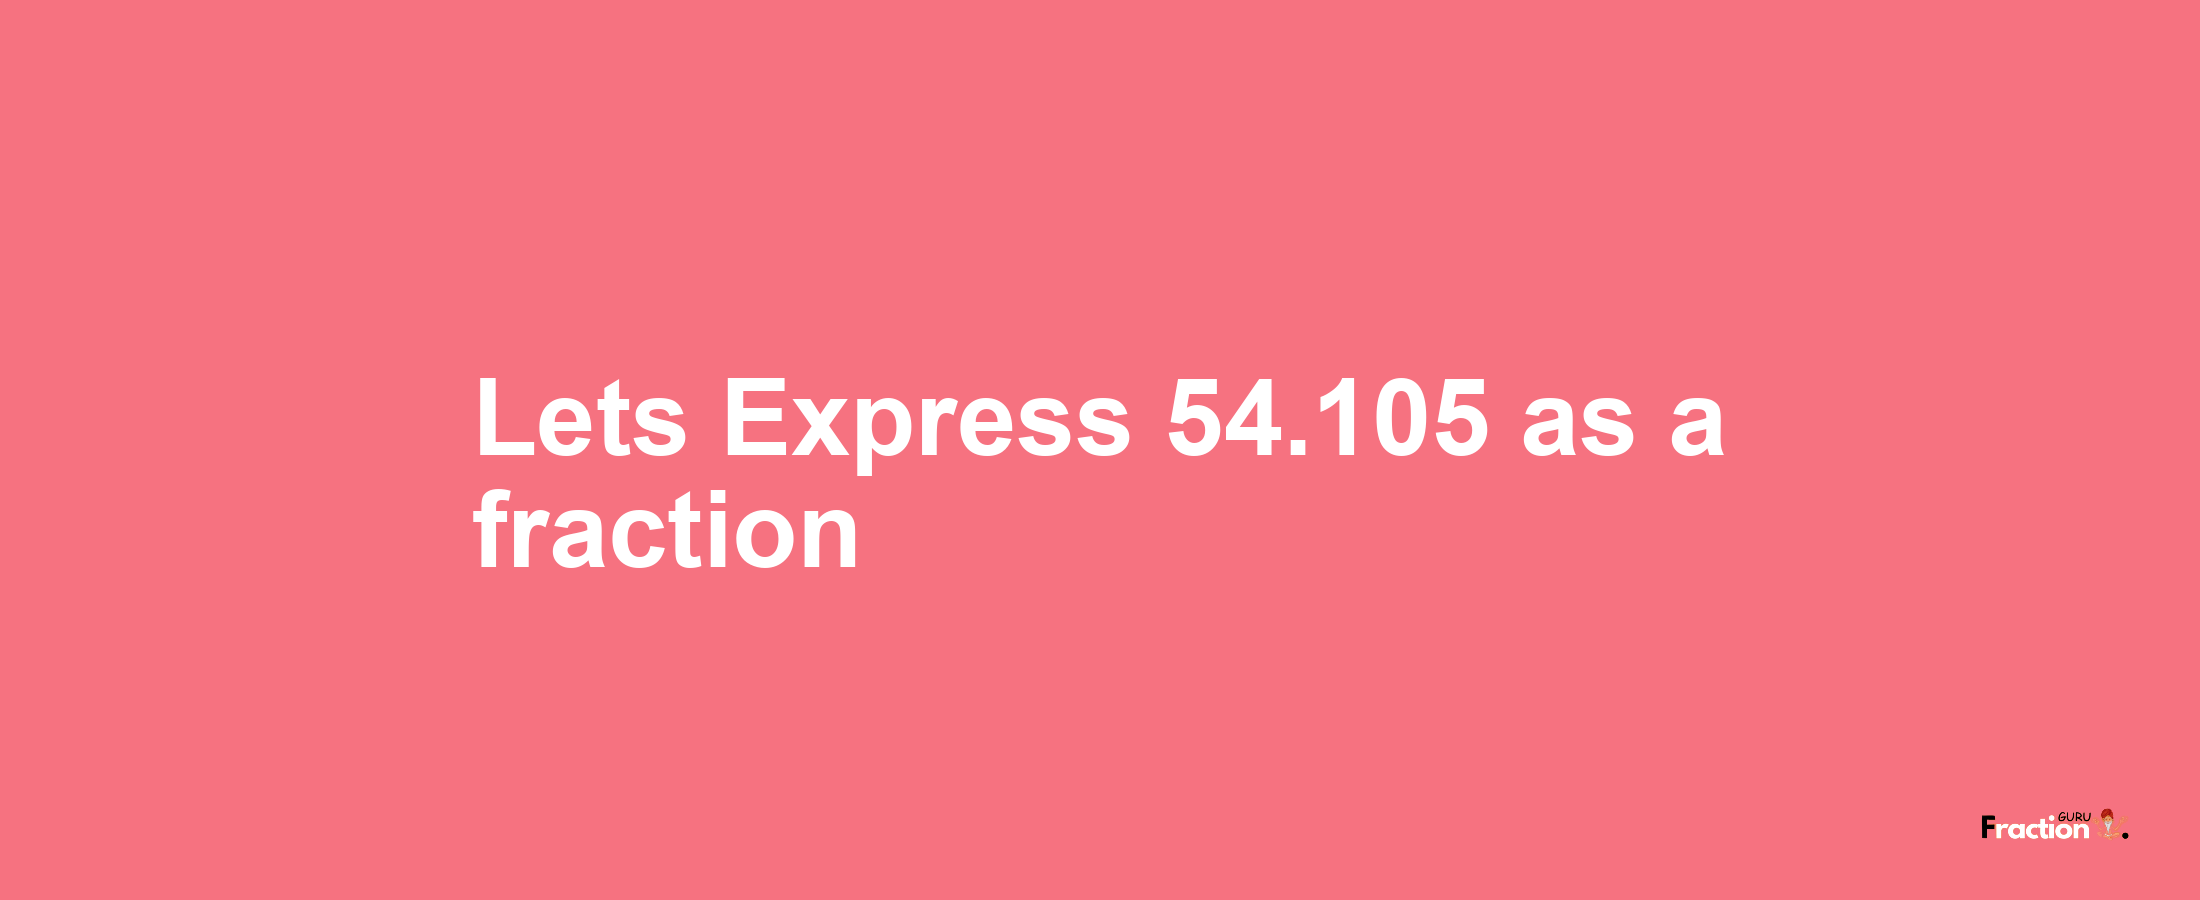 Lets Express 54.105 as afraction